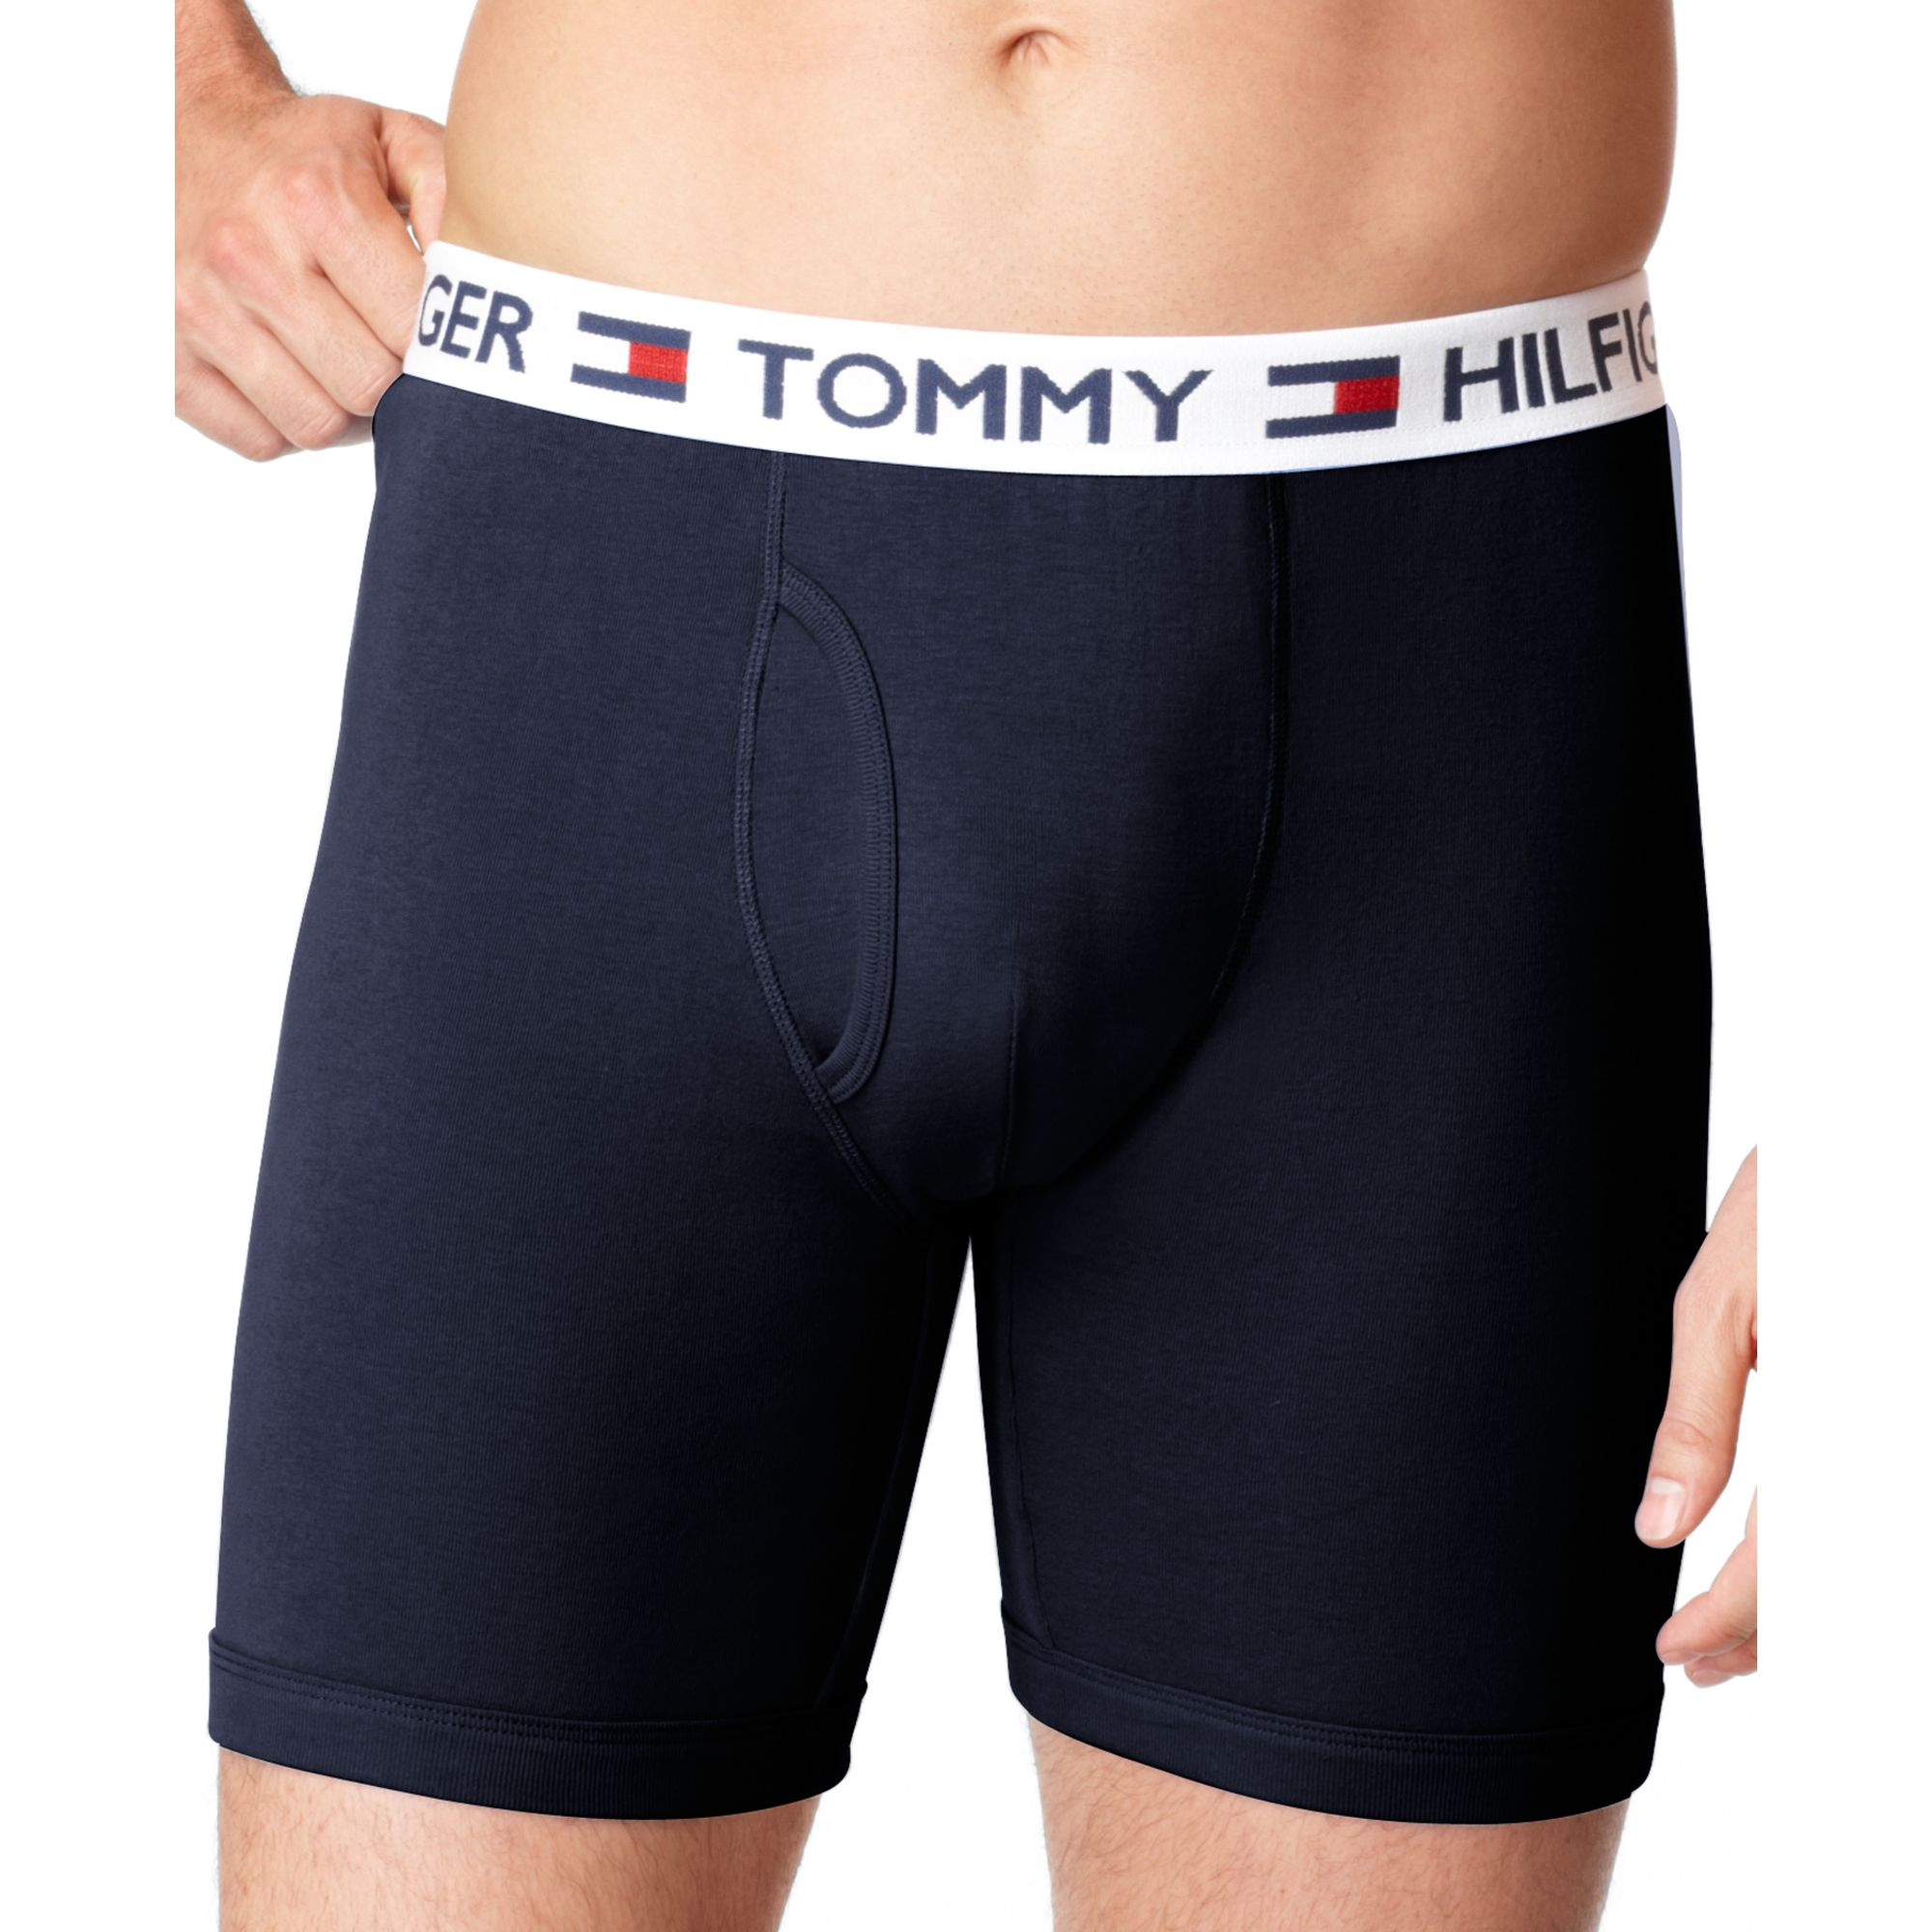 4 pack tommy hilfiger boxers